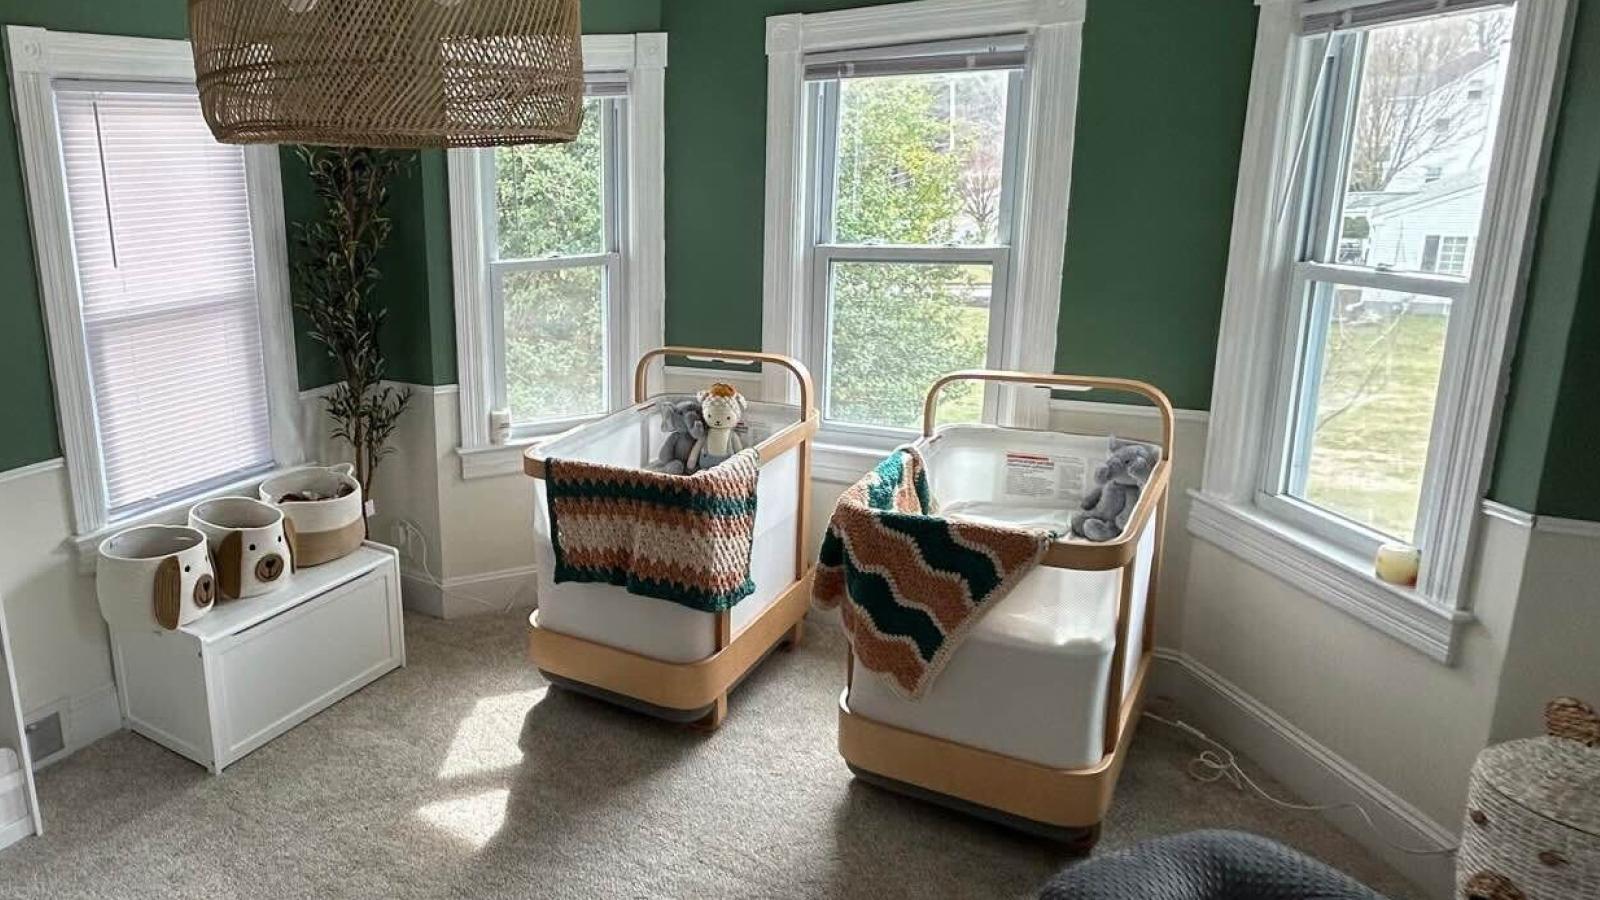 Beyond beige: Colorful baby room ideas